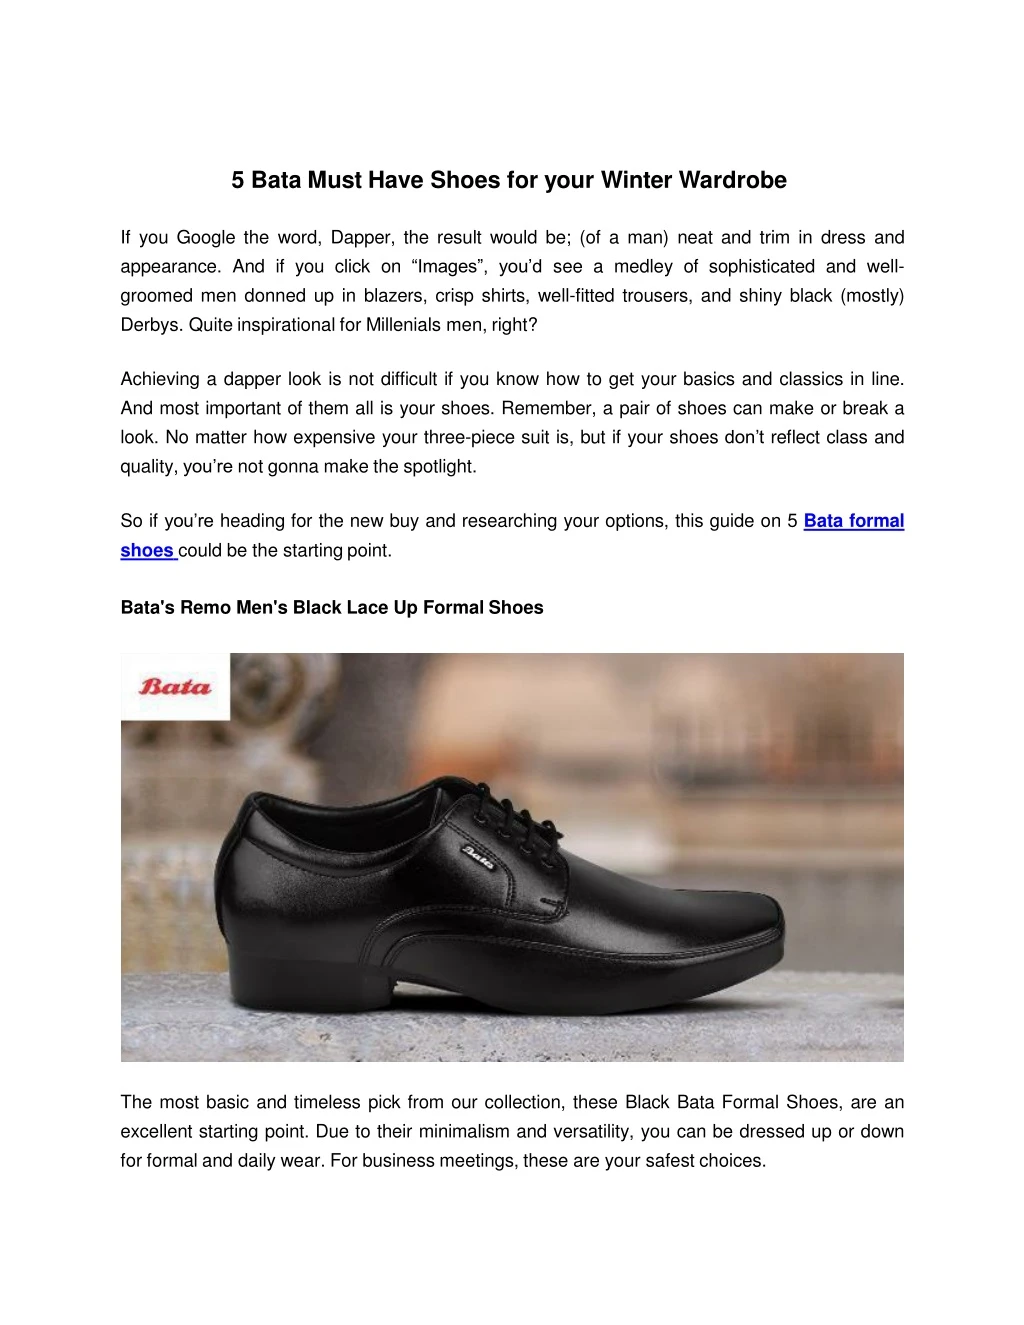 5 bata must have shoes for your winter wardrobe